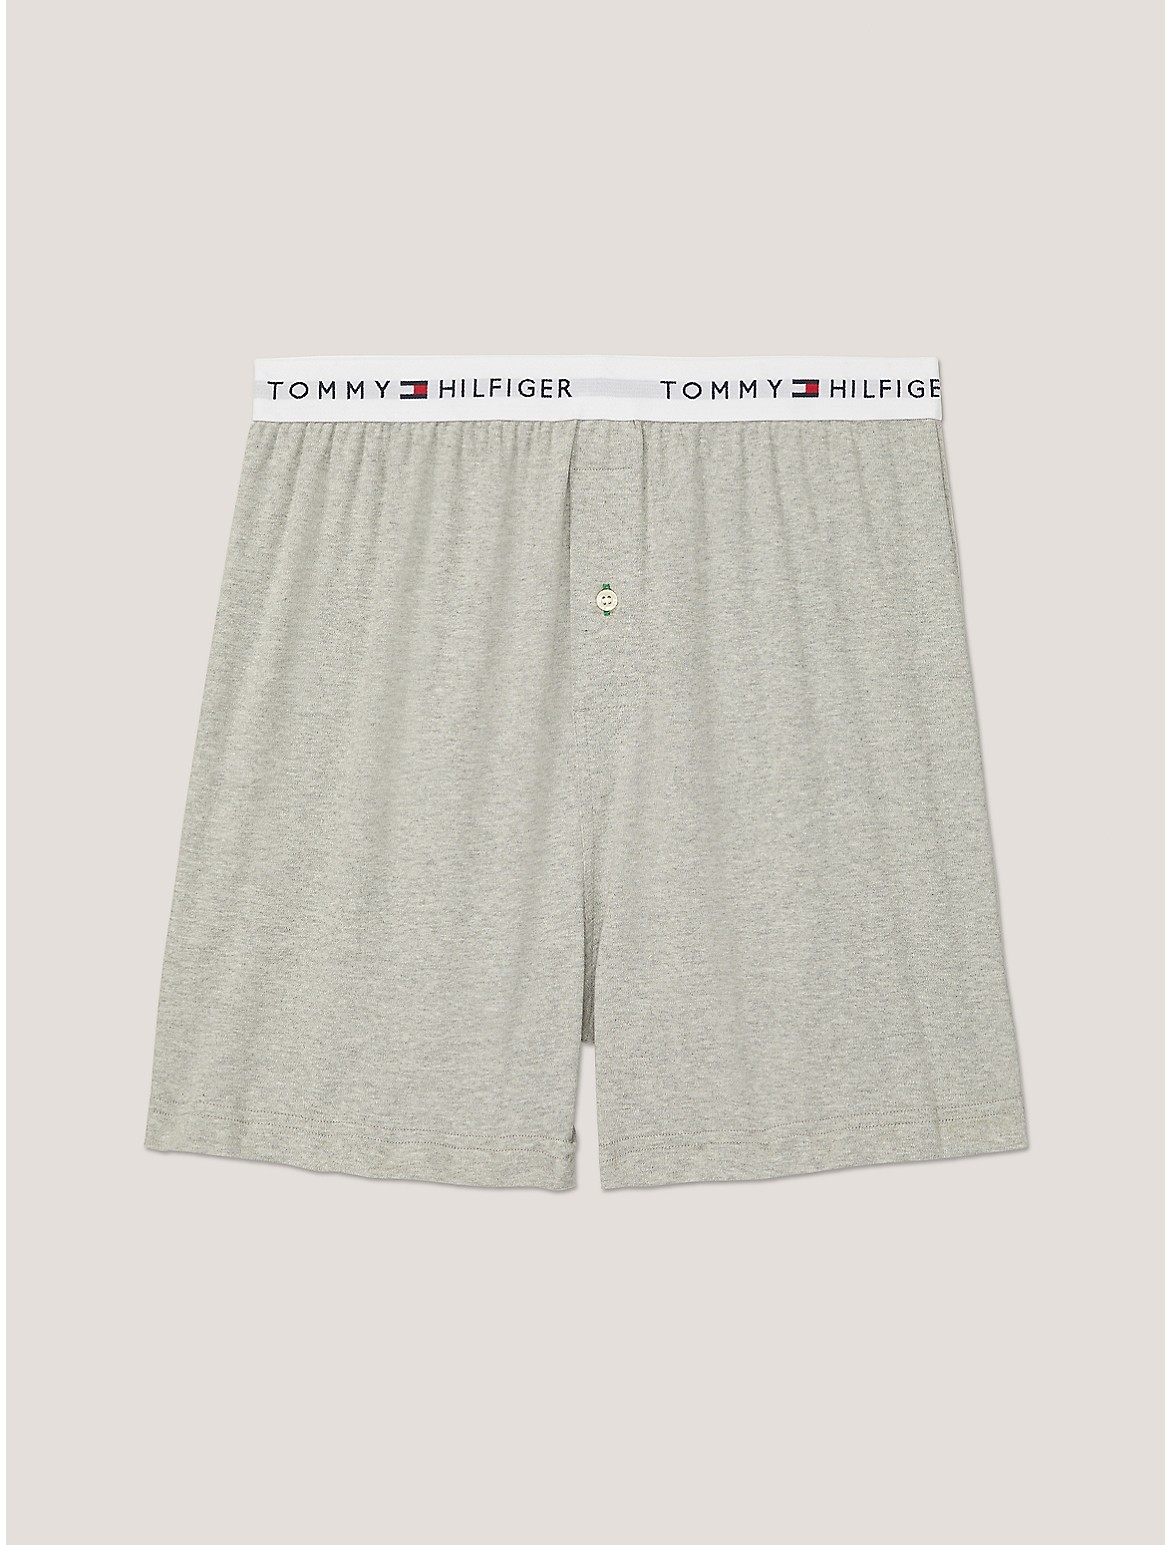 Tommy Hilfiger Cotton Classics Boxer Single Pack In Grey Heather